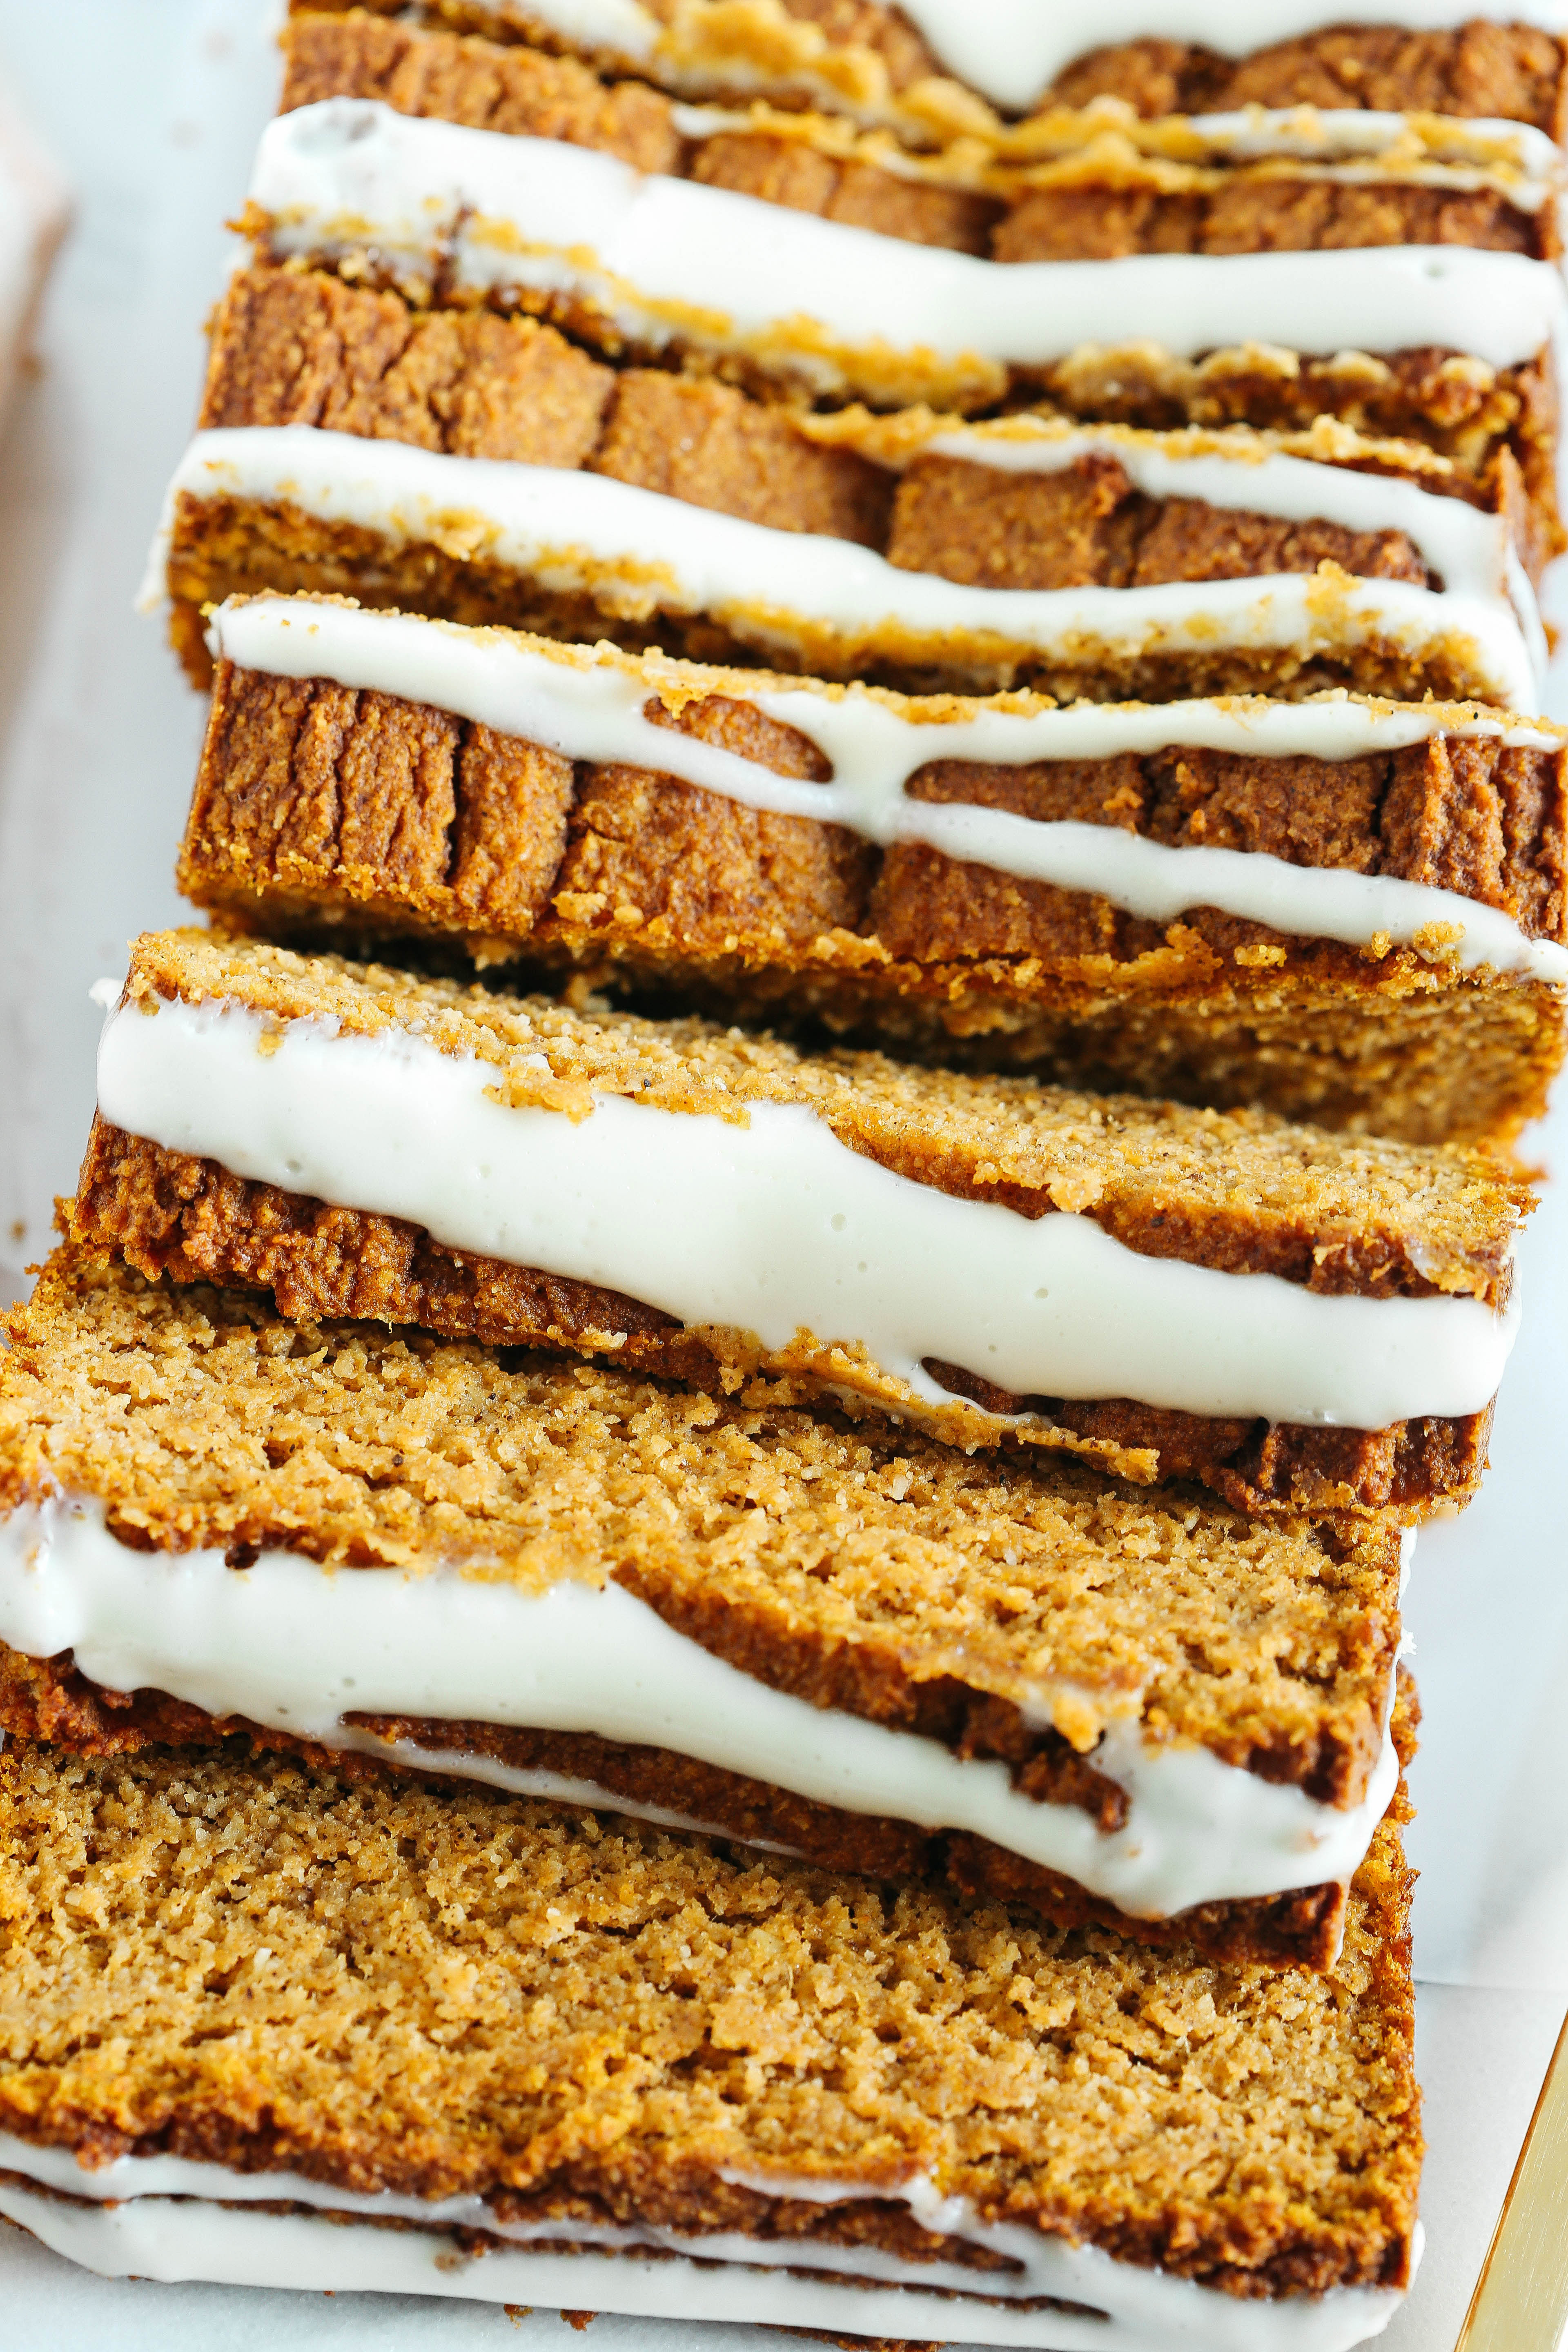 The BEST Almond Flour Pumpkin Bread recipe that is a must to make this fall!  Super moist, easy to make and drizzled with a delicious cream cheese glaze!